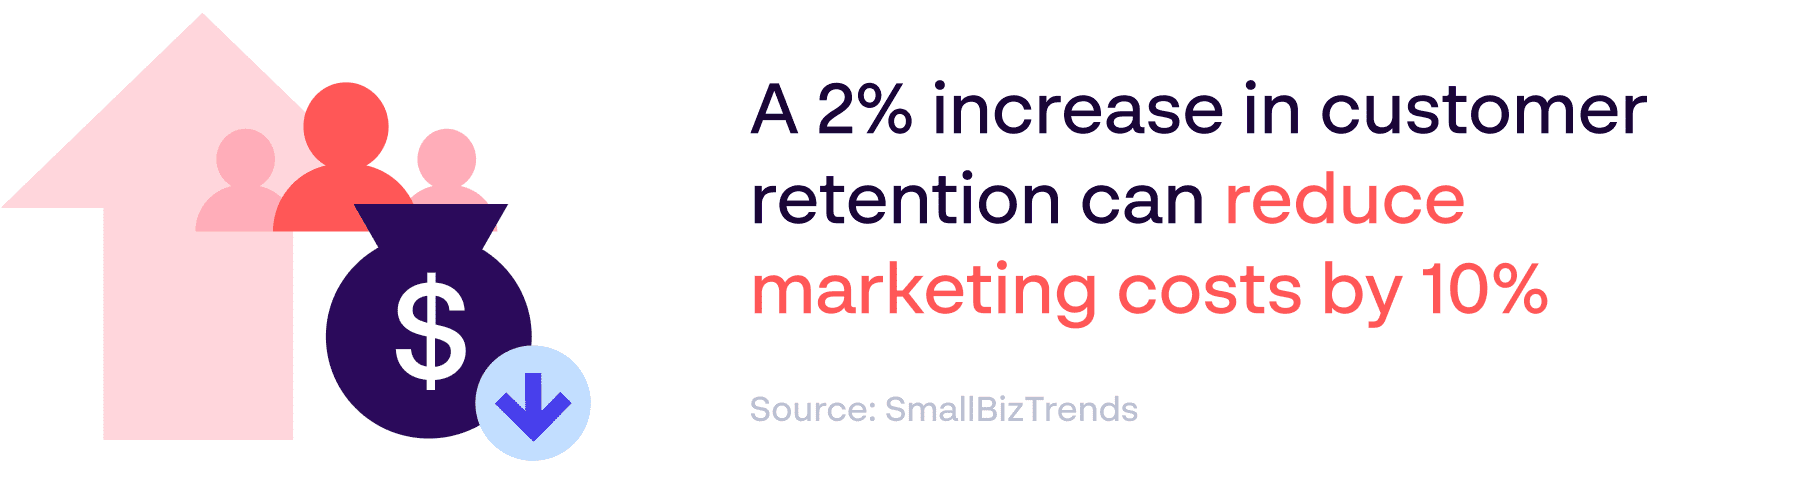 “Brand consistency leads to a 2% increase in customer retention and 10% reduction in marketing costs. Source: SmallBizTrends”